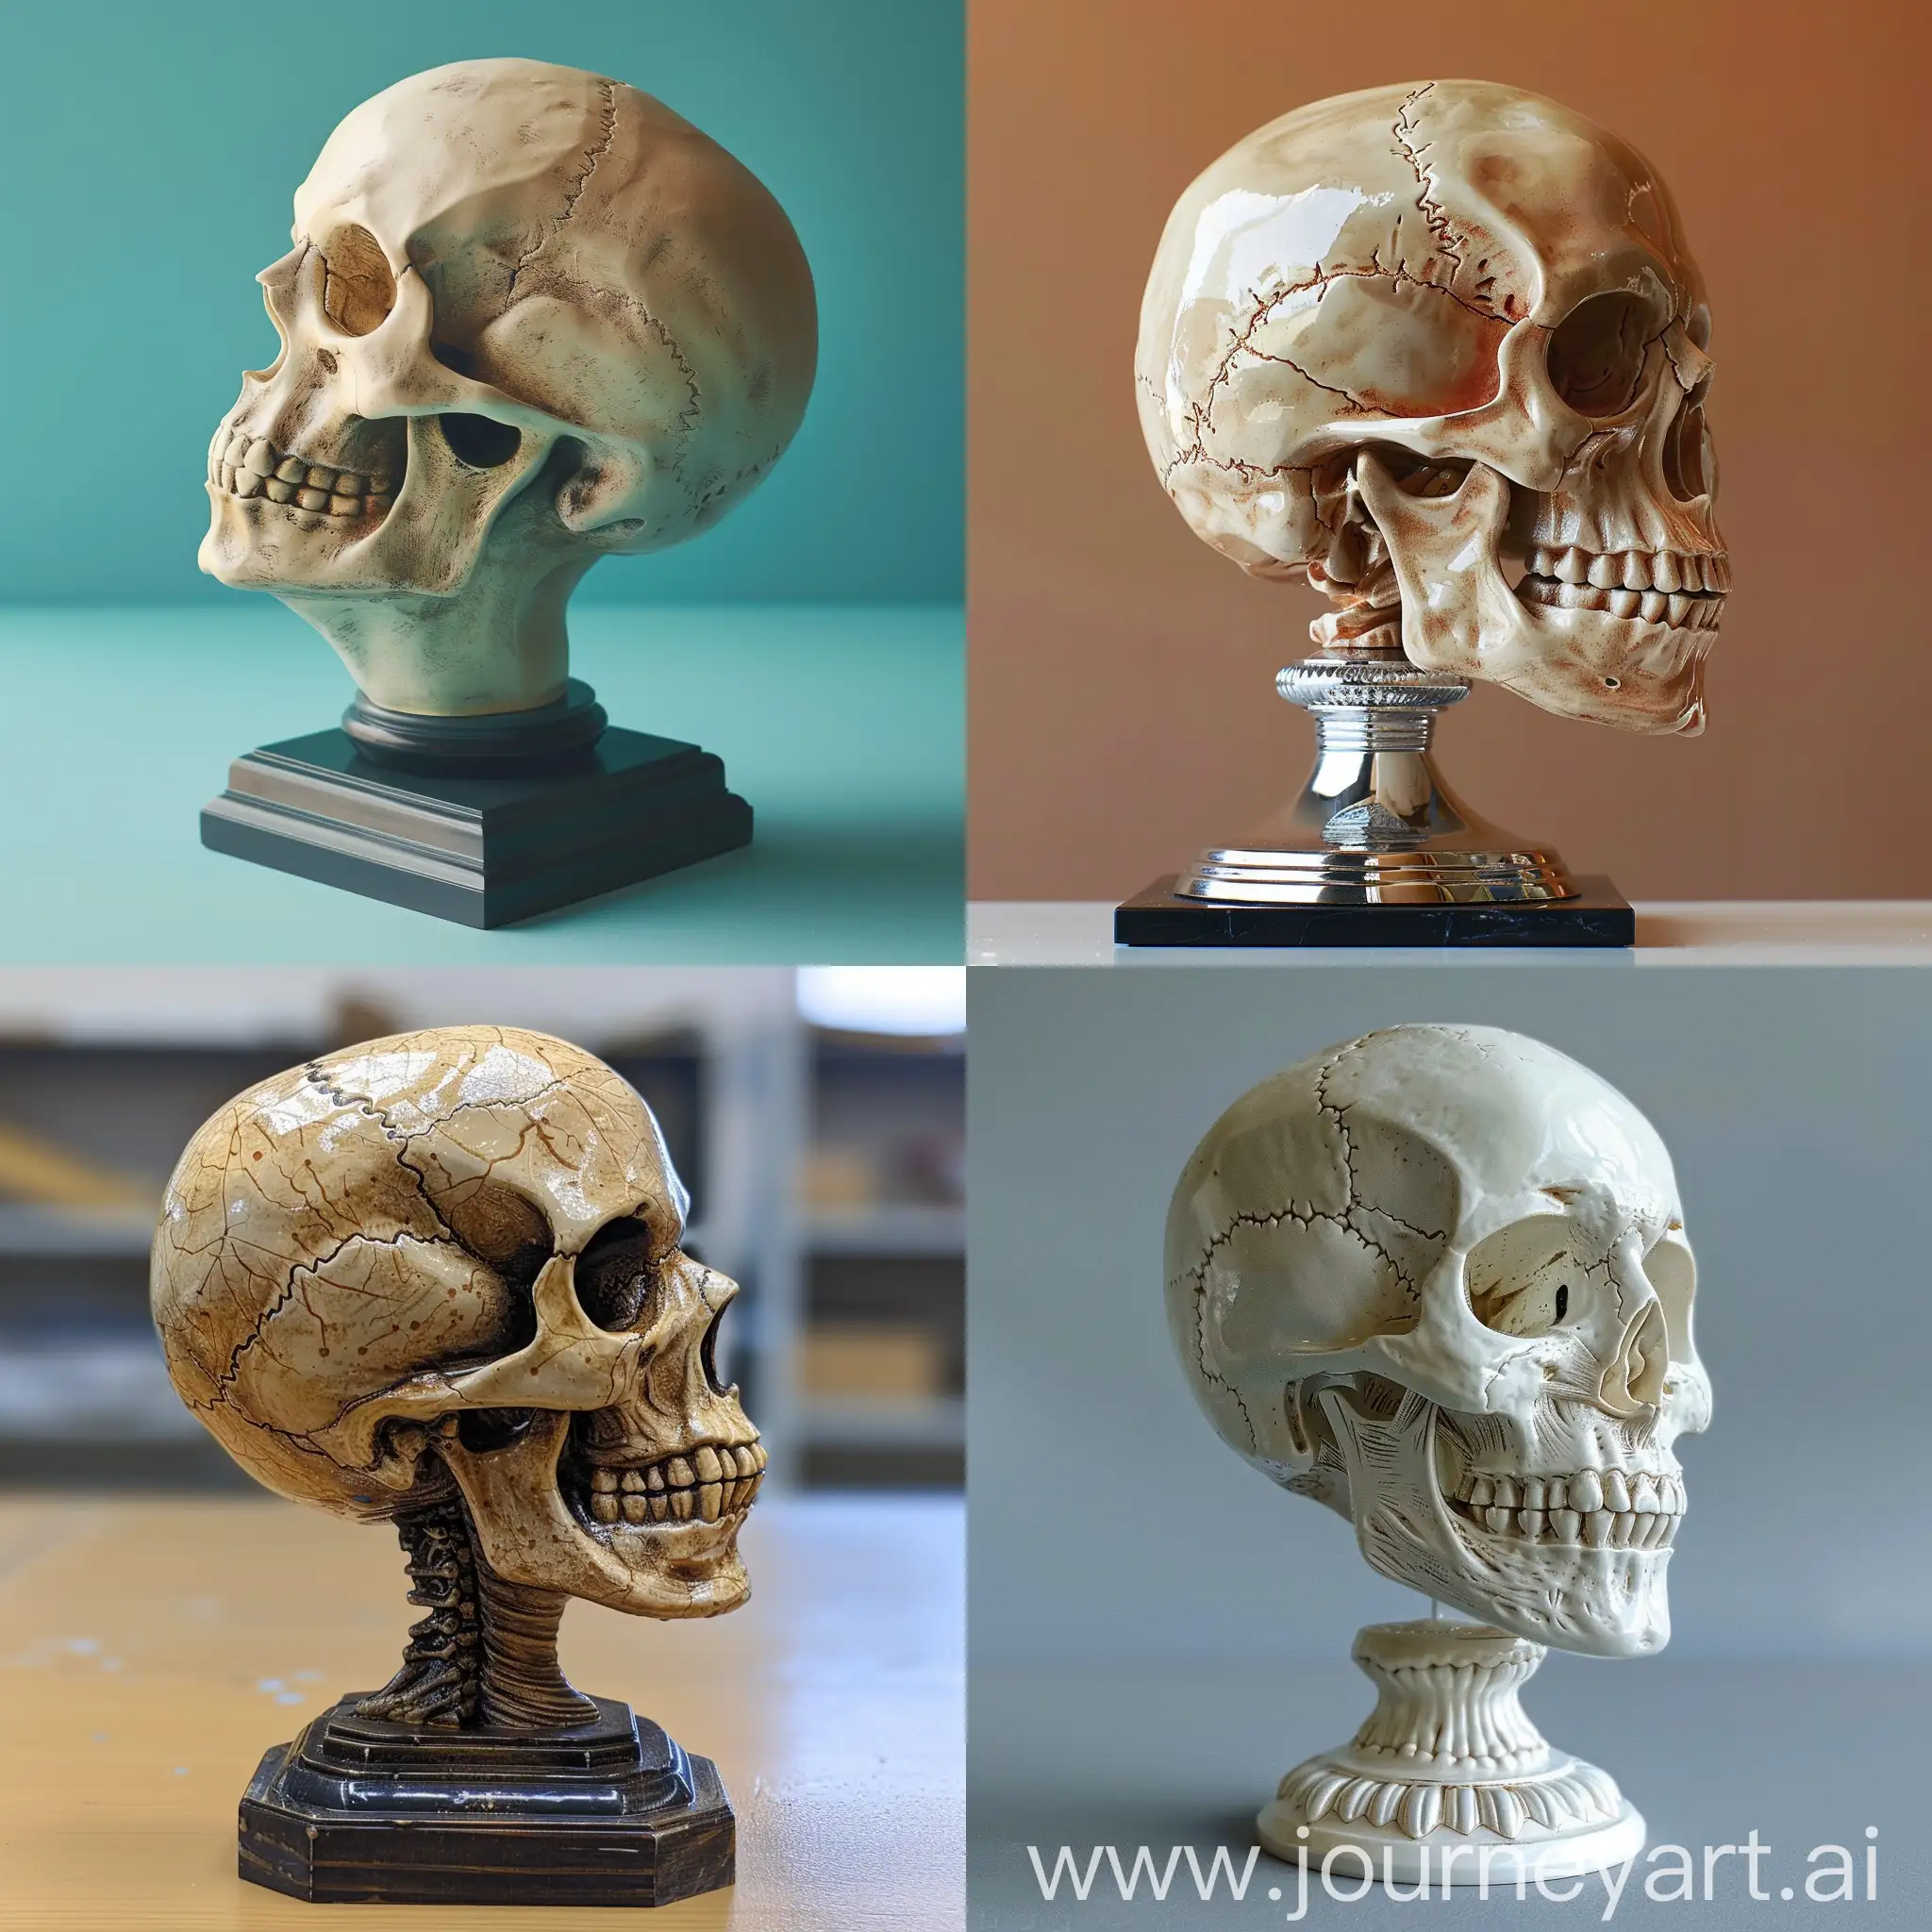  design a trophy shaped like a skull for winner of the anatomy olympiad